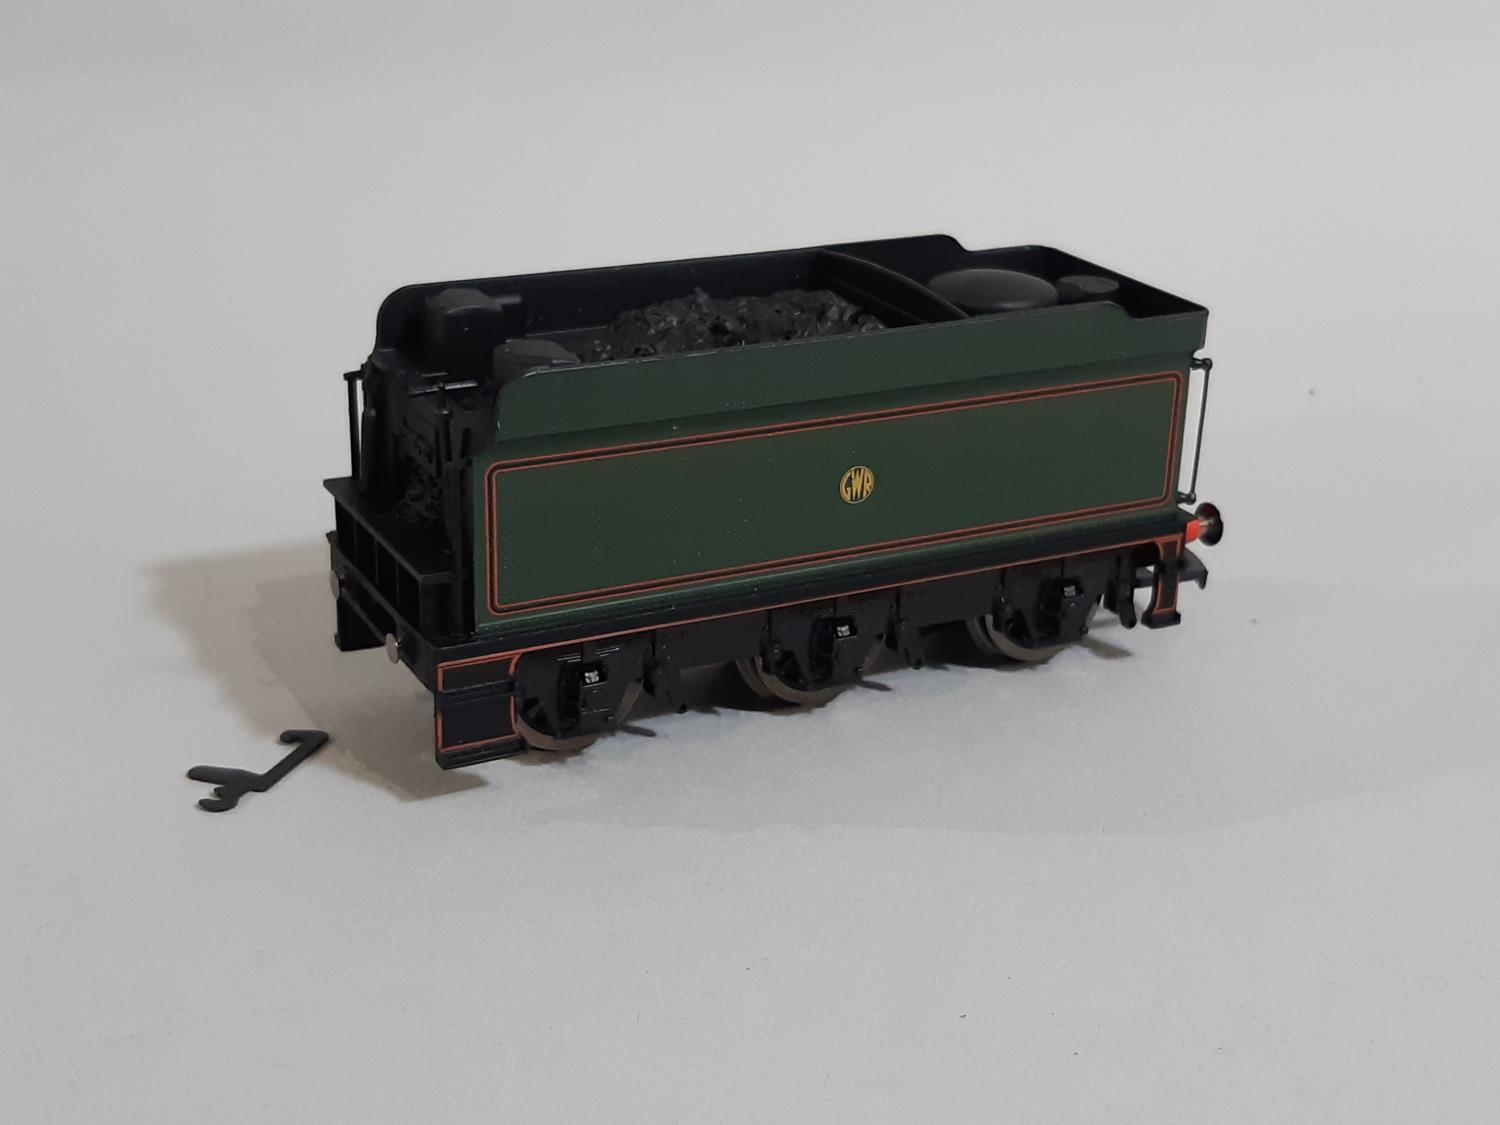 Hornby railway 00 gauge box set 'The Cornish Riviera' R1102, includes 4-6-0 Cardiff Castle - Image 4 of 6